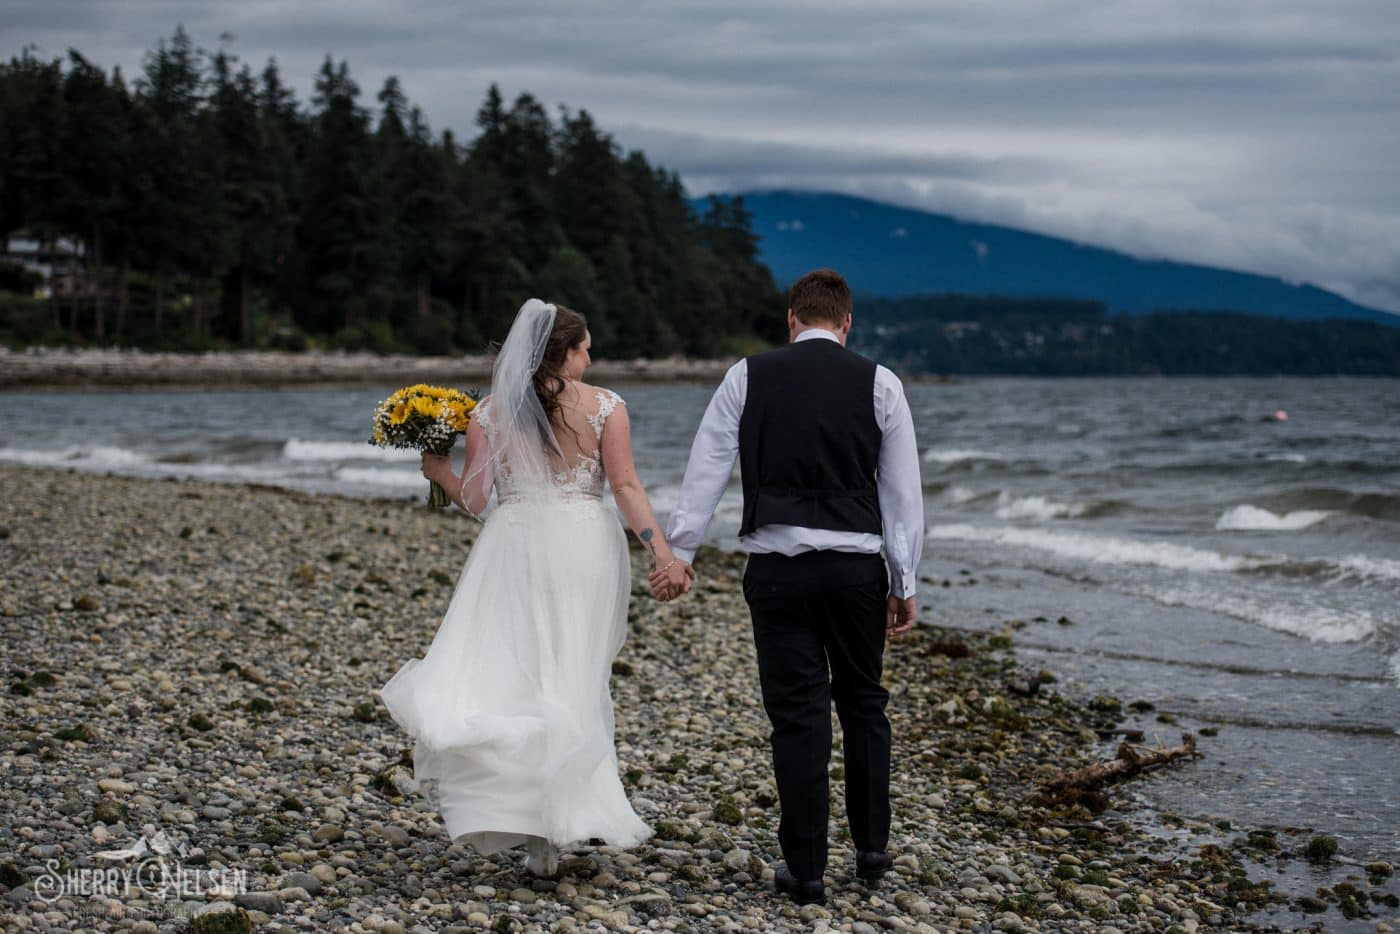 Shane and Shelbi's Sechelt wedding day included a walk along a stormy beach with her sunflower bouquet to brighten the day like sunshine